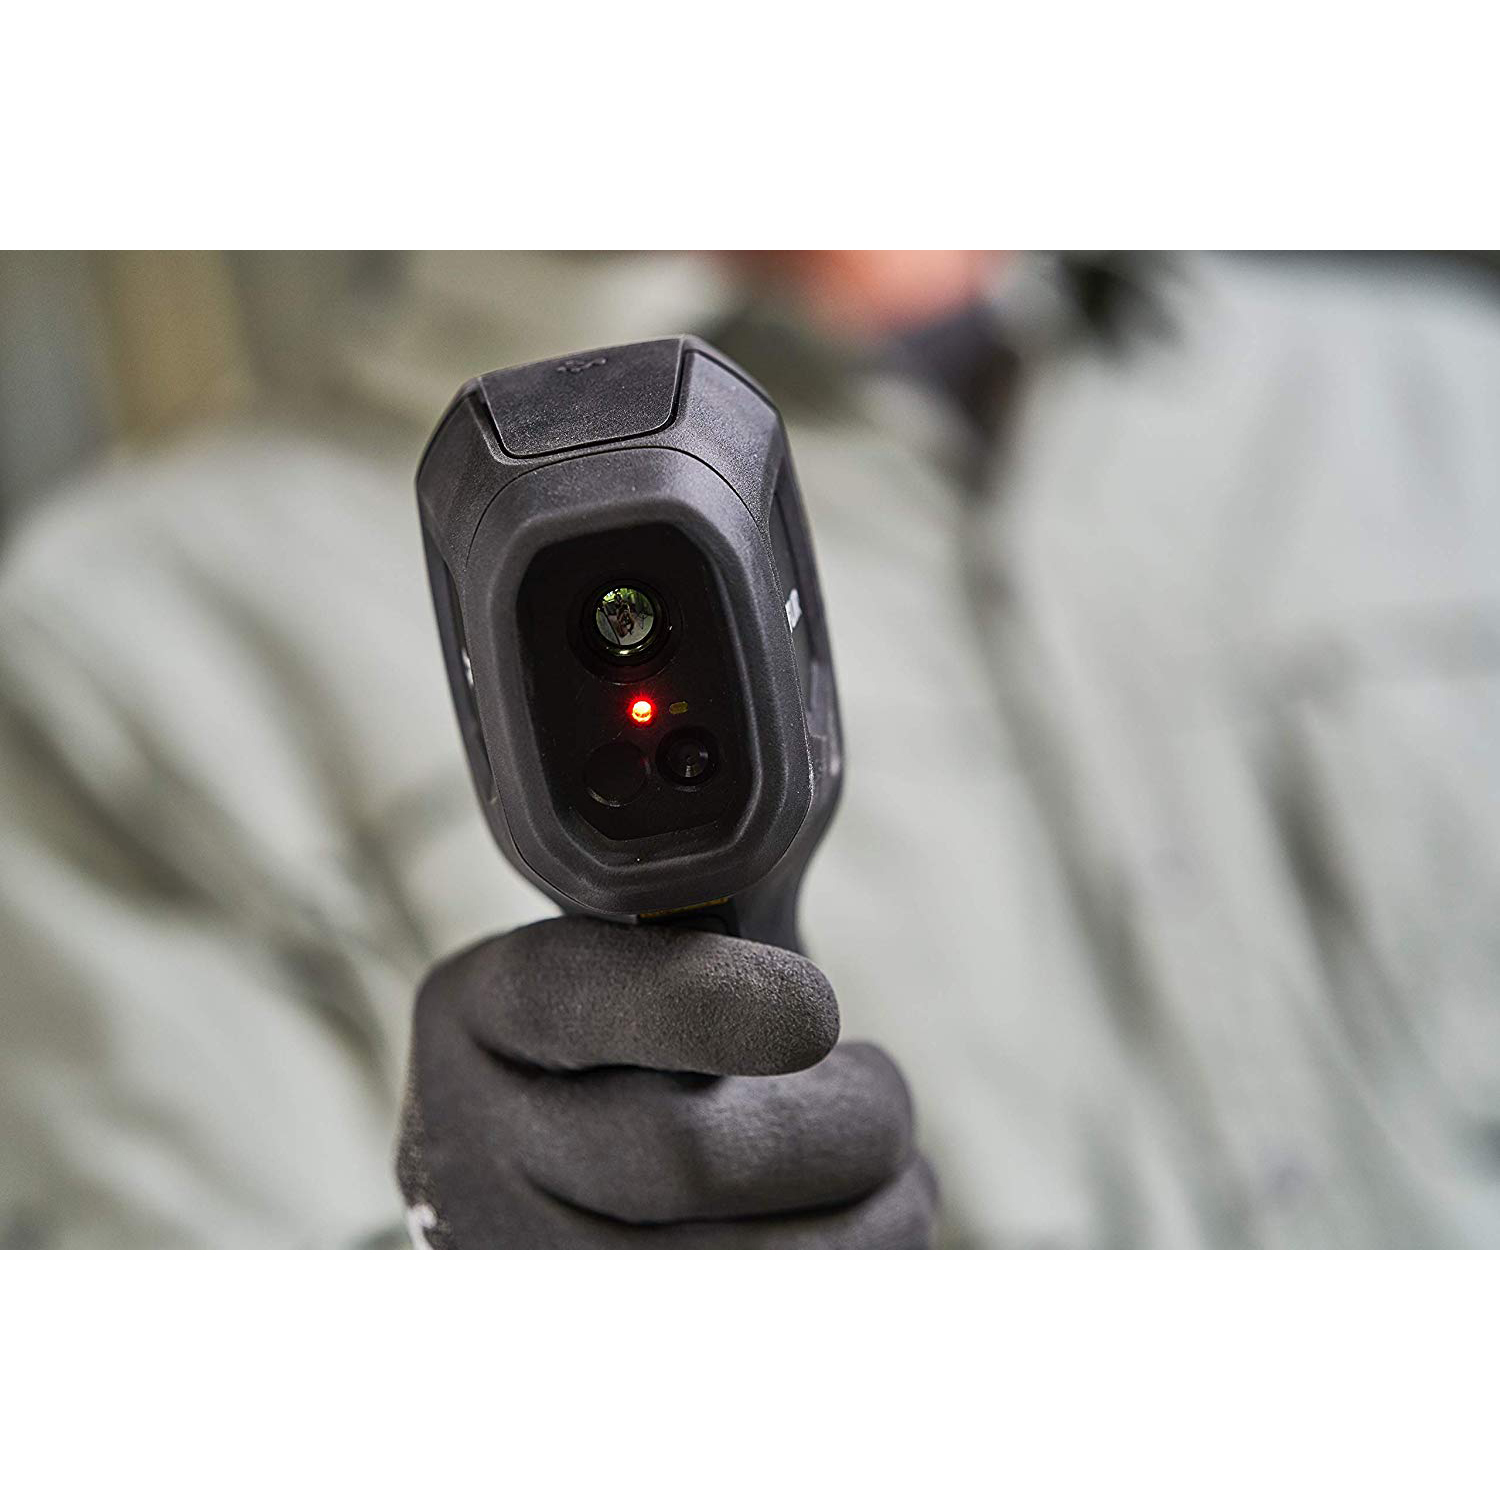 FLIR Diagnostic Thermal Imaging Camera with Bluetooth TG267